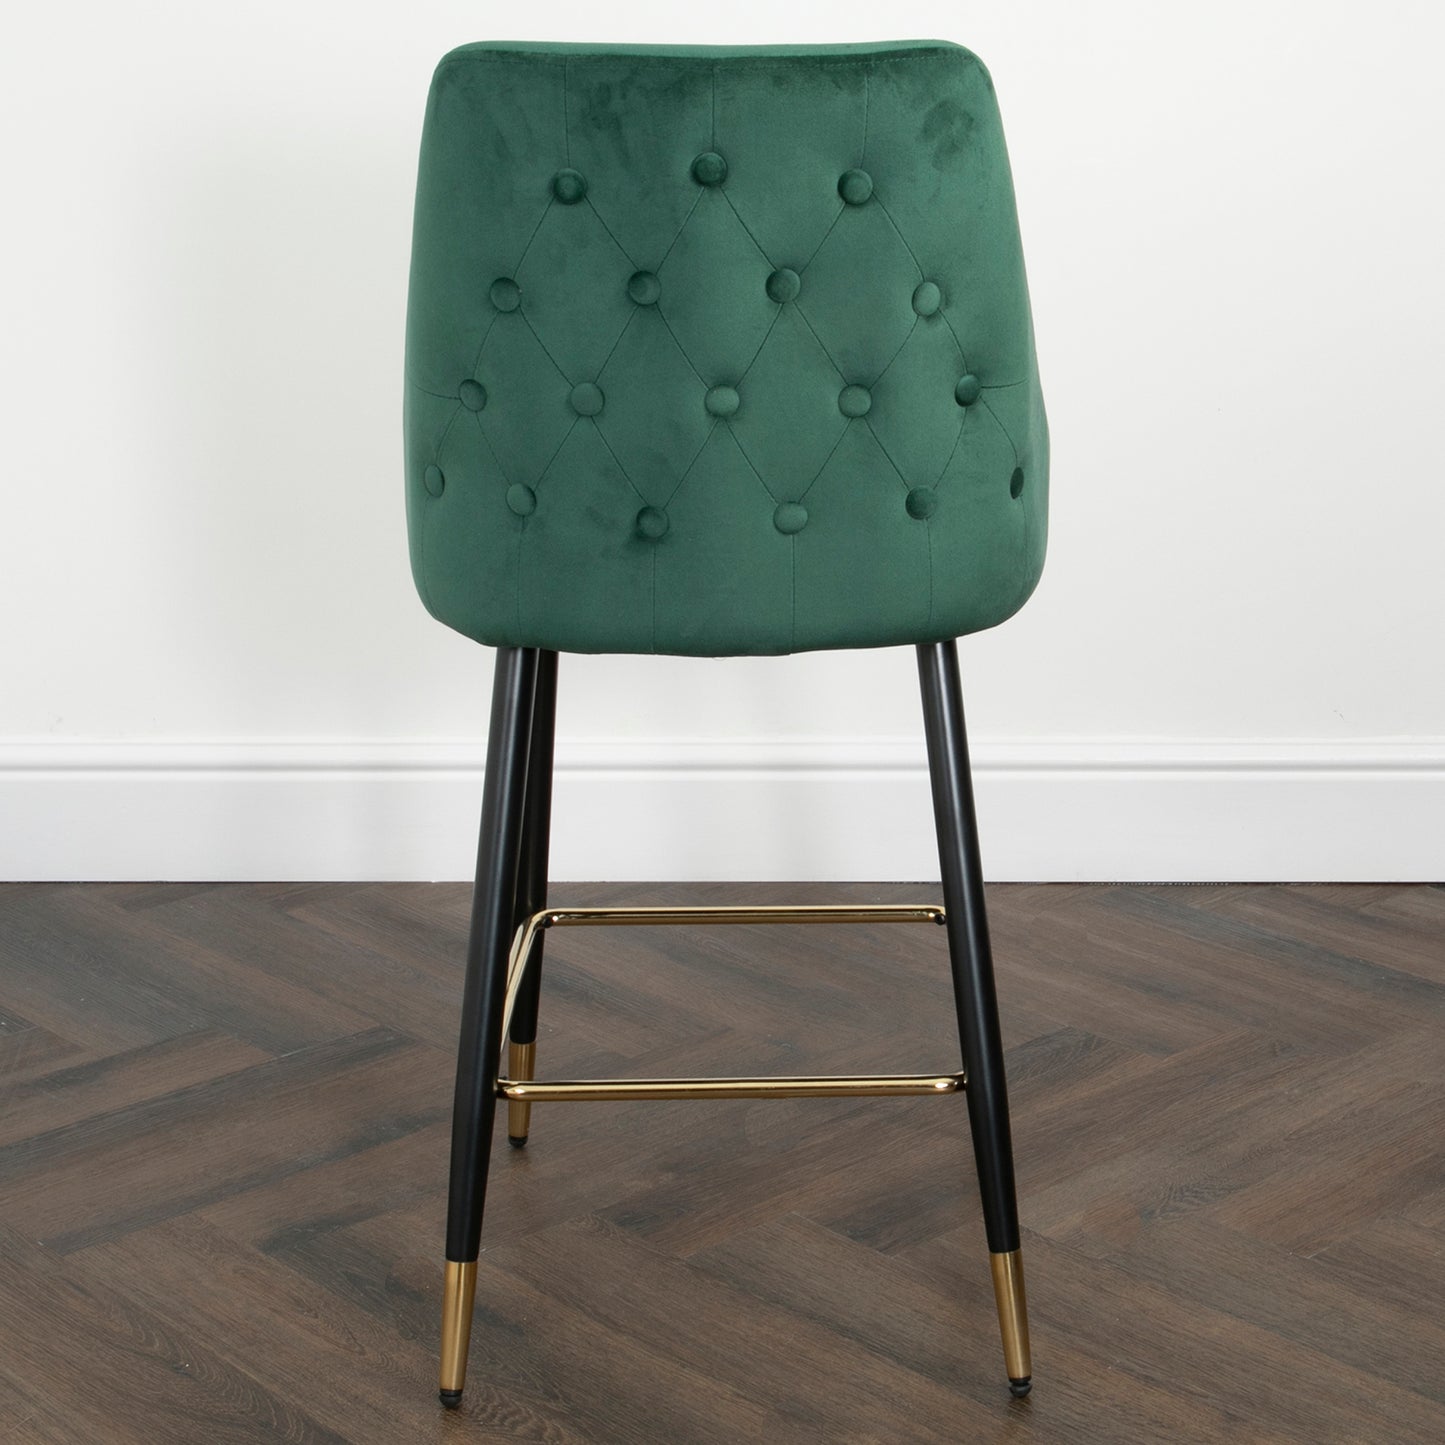 2 Set chesterfield green kitchen bar stool by Native